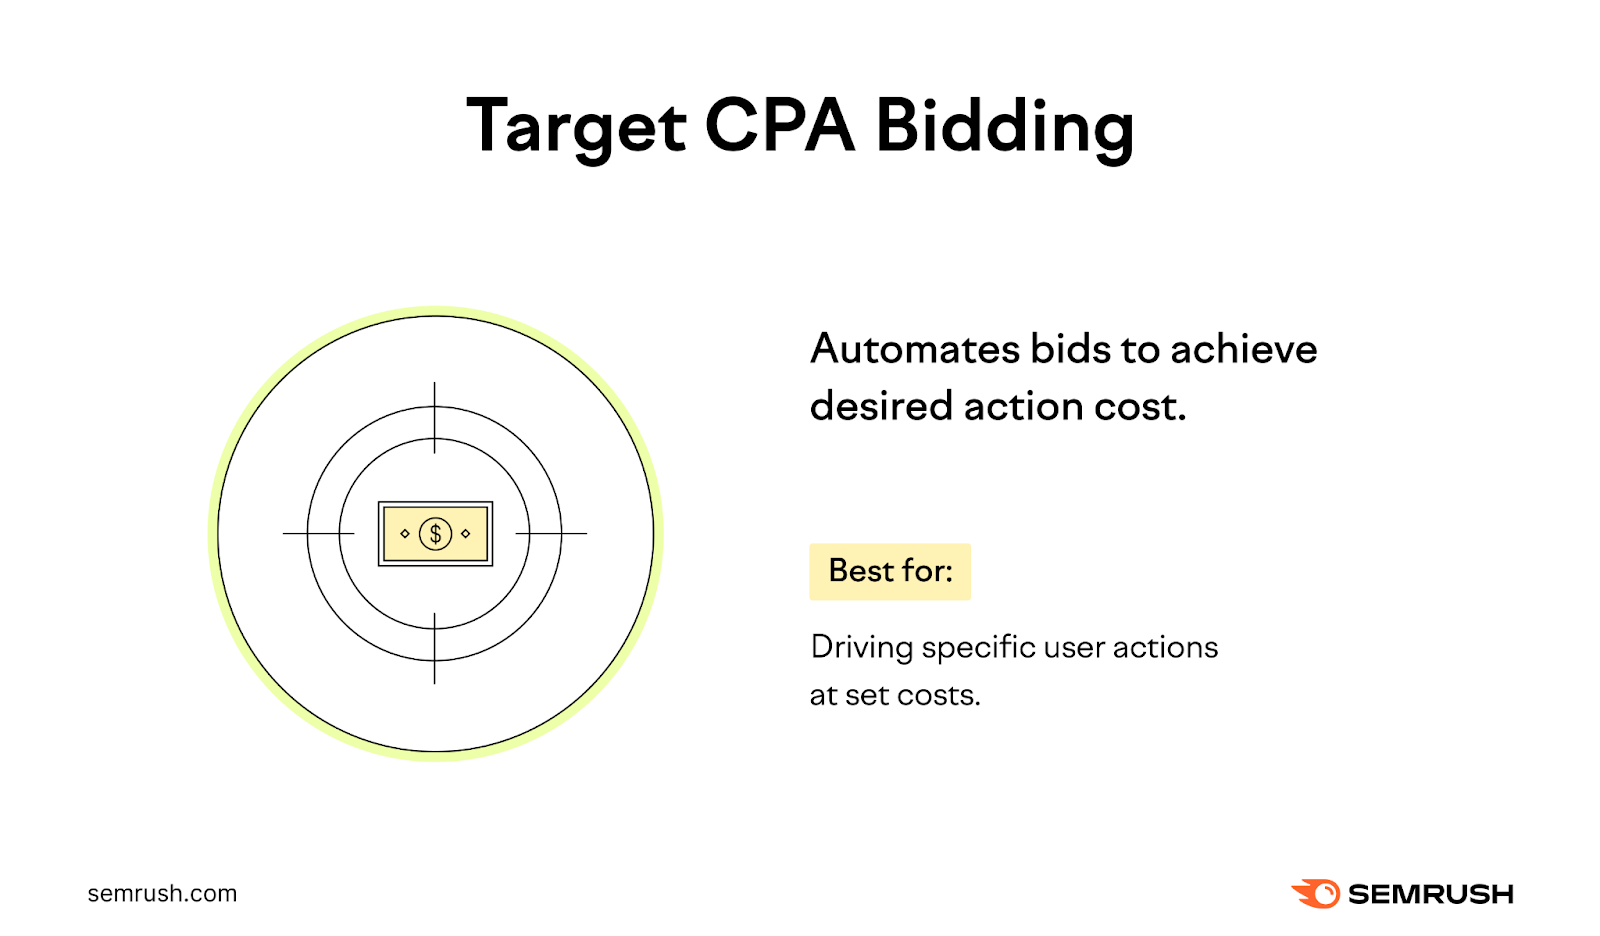 Target Cost-per-Action (CPA) Bidding